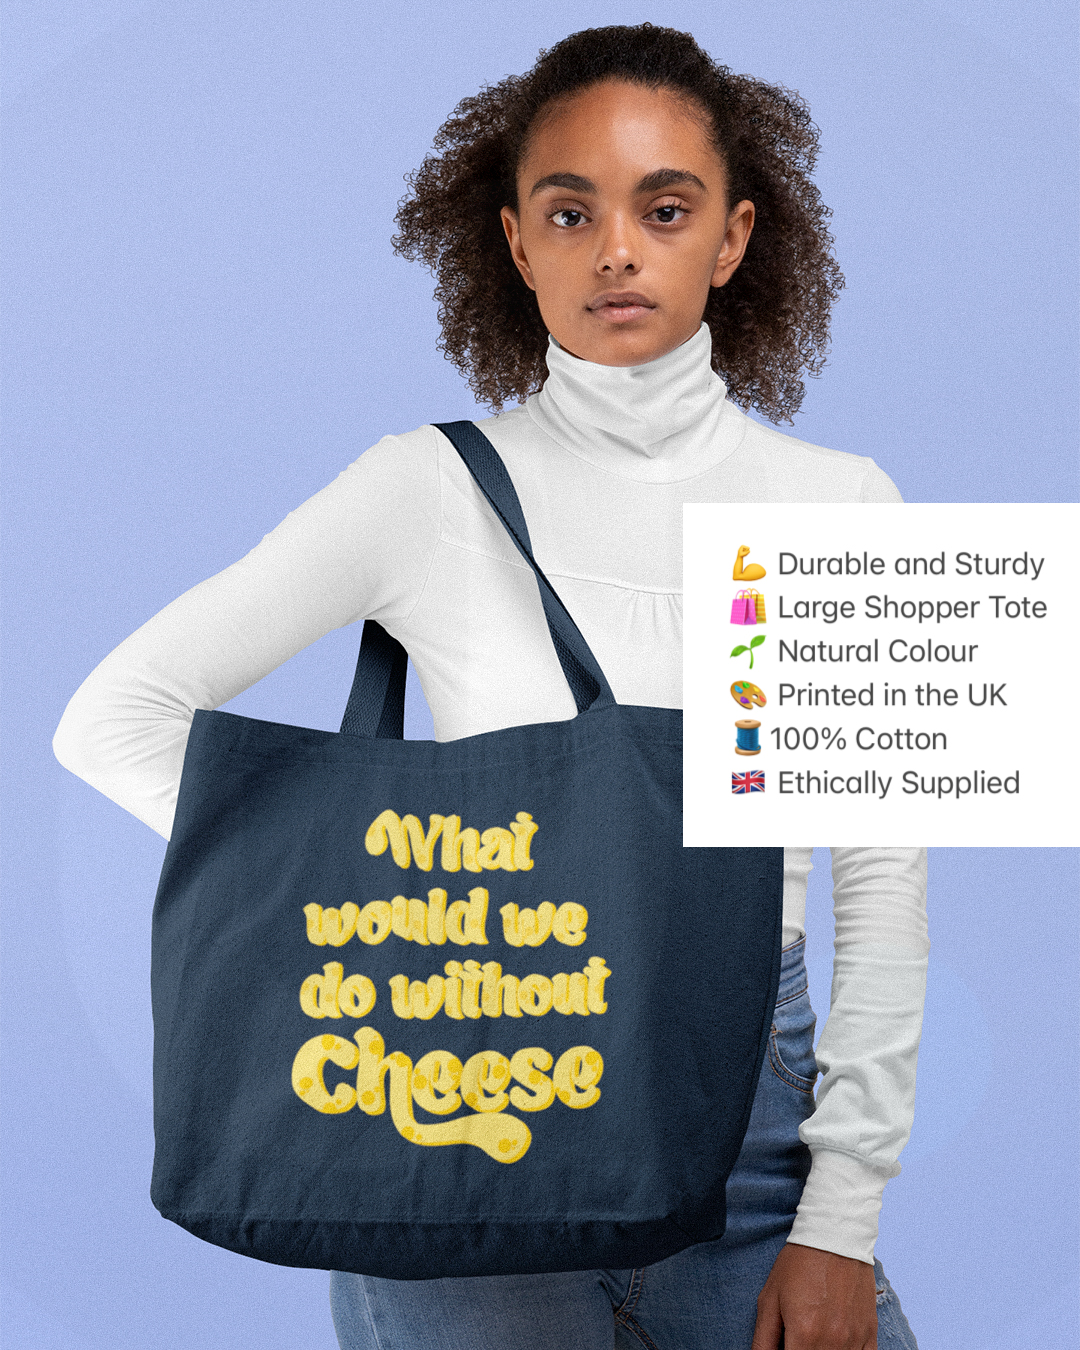 What Would We Do Without Cheese Tote Bag - What Would We Do Without Cheese? Tote Bag - Funny Cheese Lovers Shopper Tote Bag